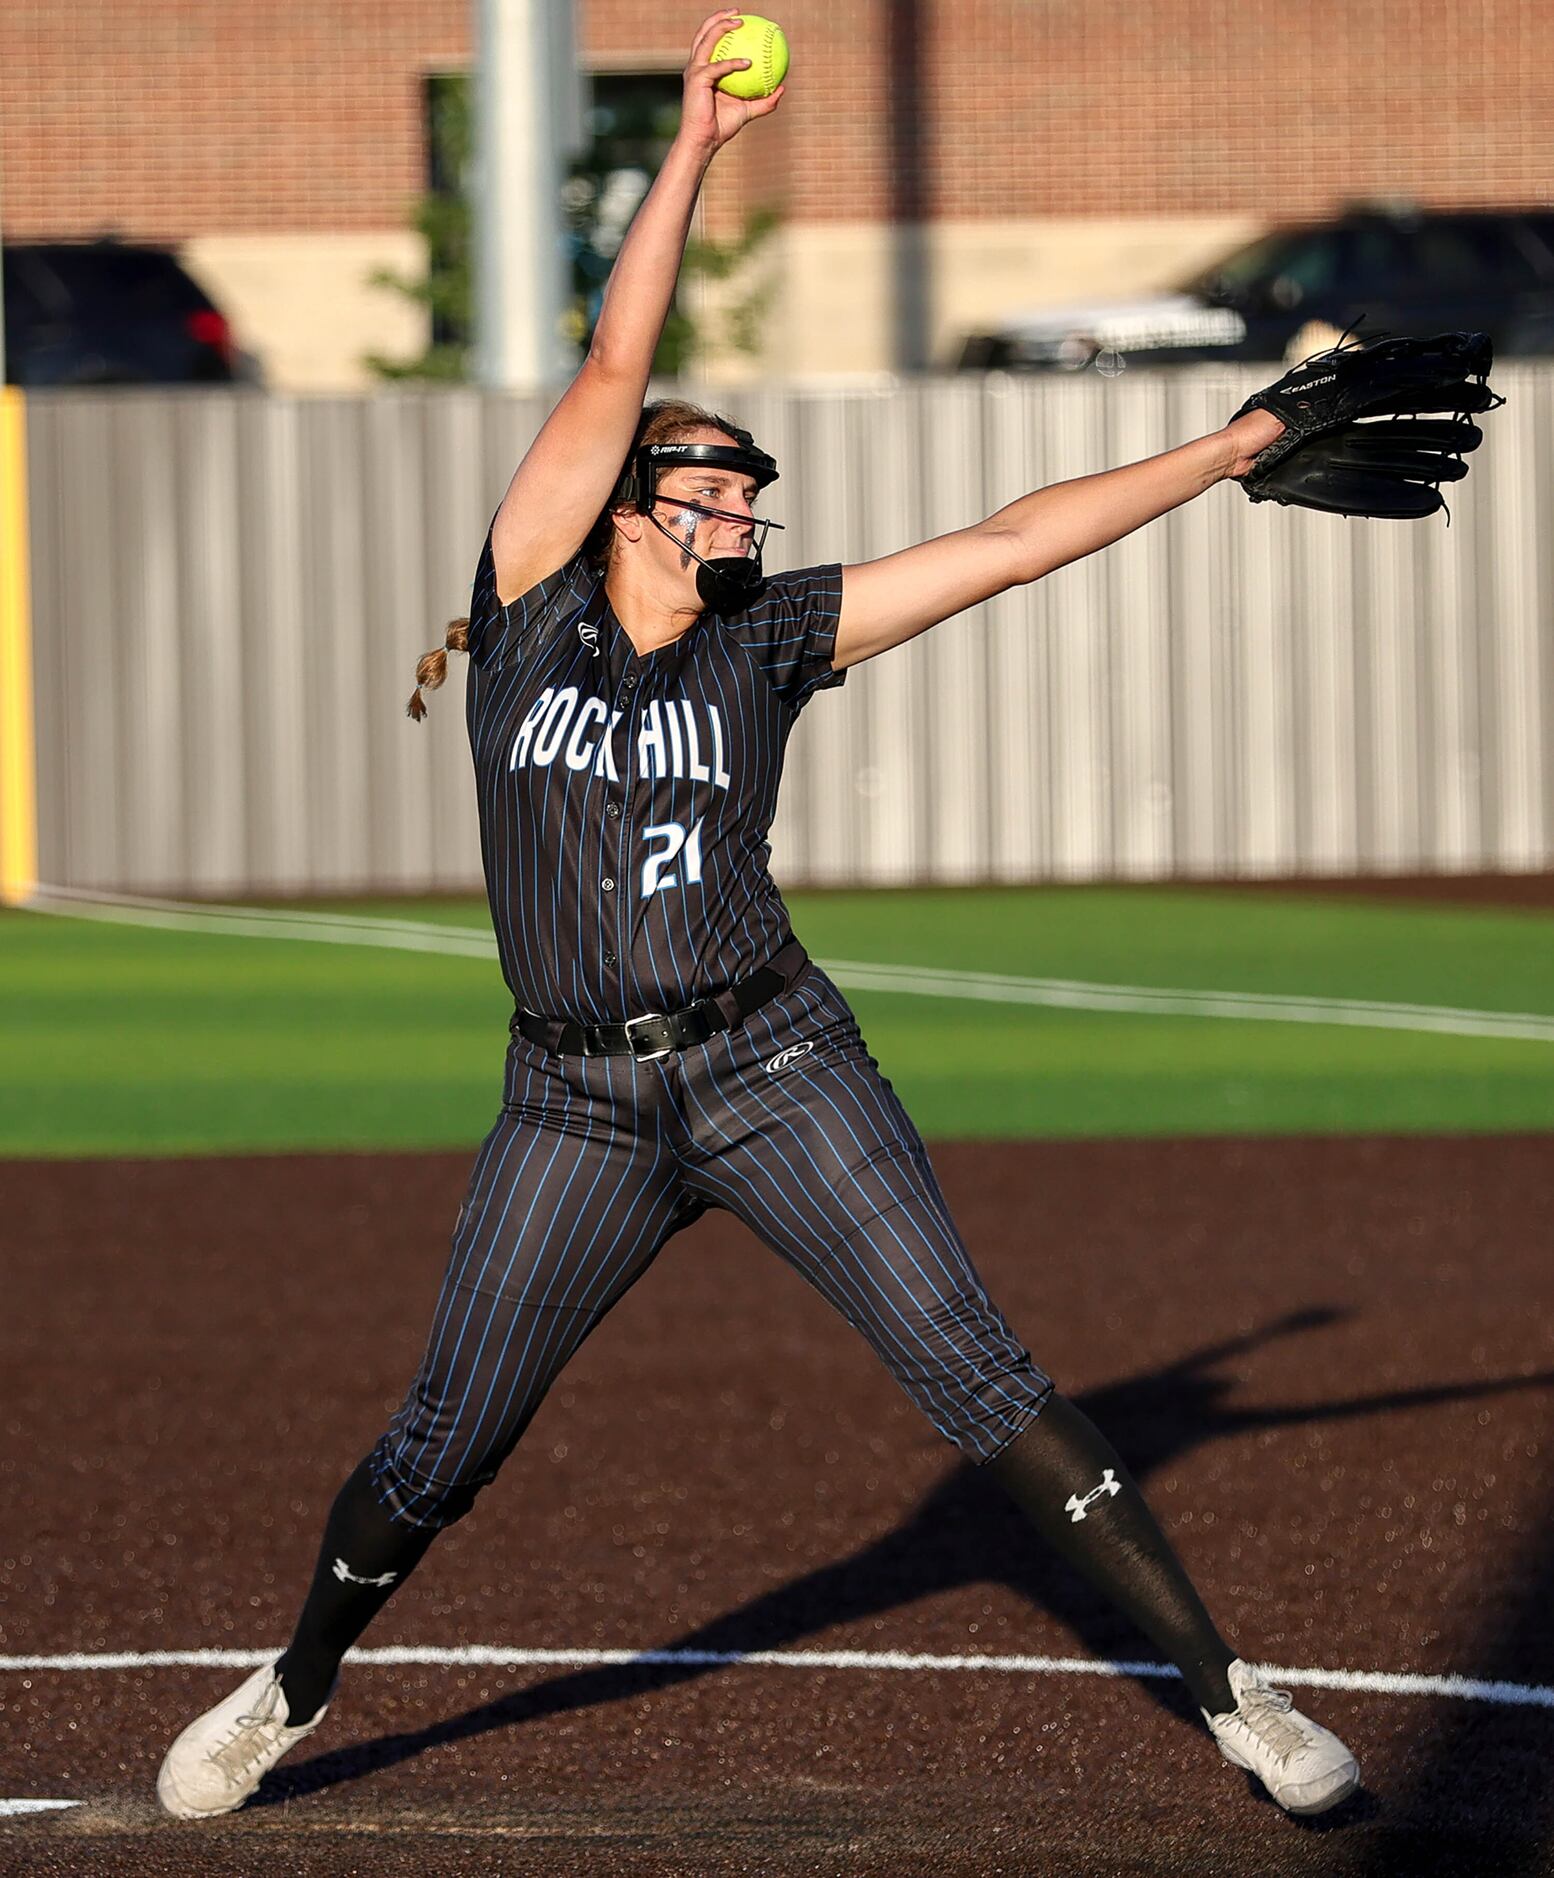 Prosper Rock Hill starting pitcher Taylor Hagen shuts out Royce City, 1-0 in game 2 of the...